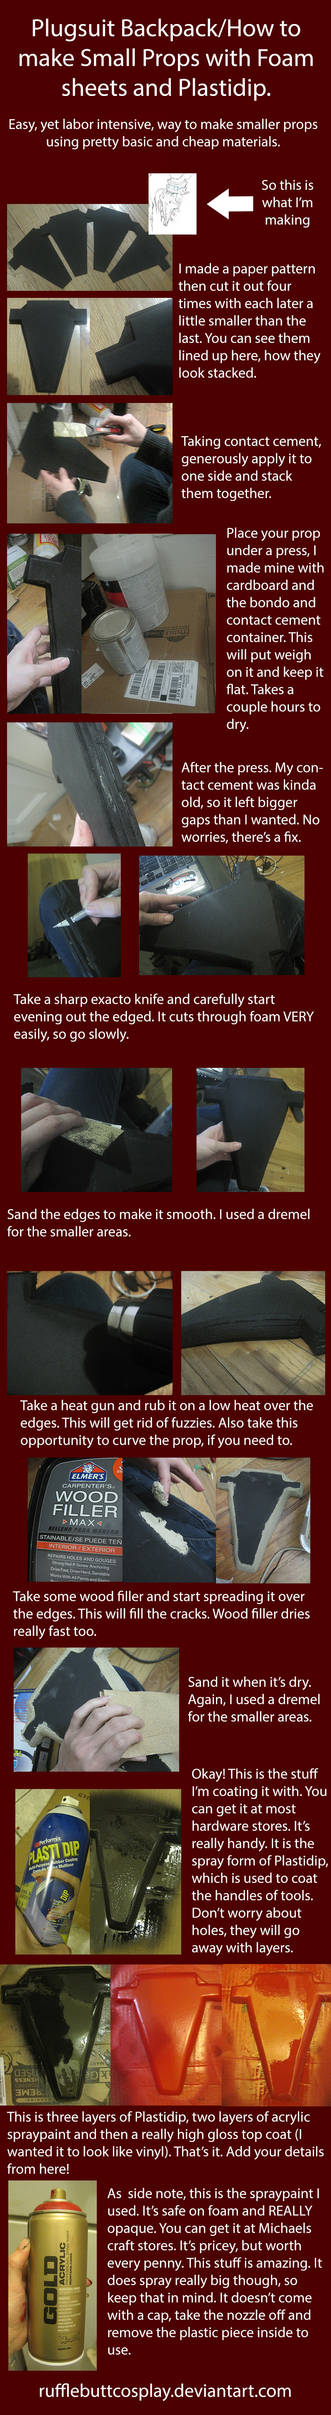 How to make Props with Plastidip and Foam Sheets